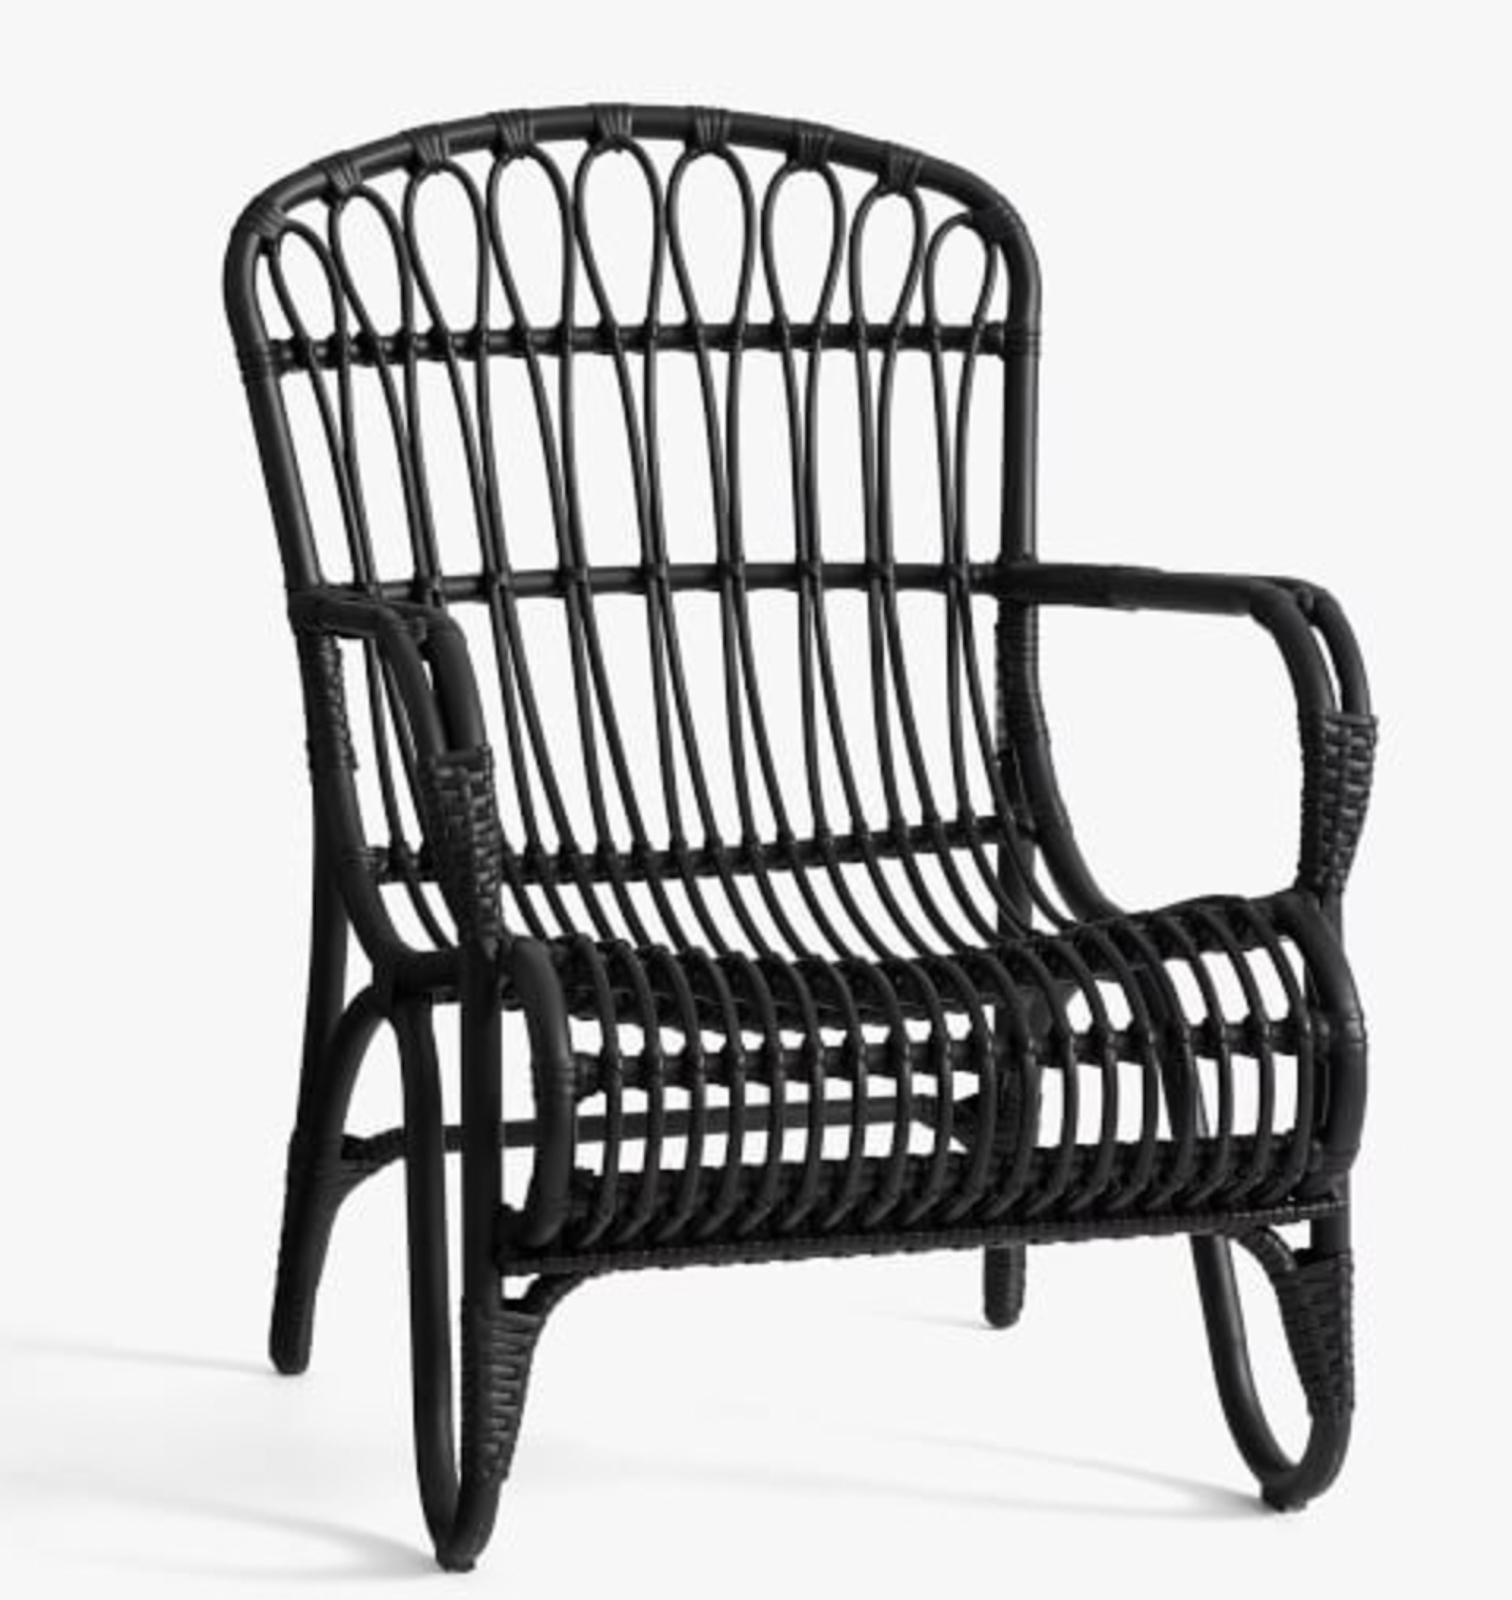 modern outdoor patio chairs